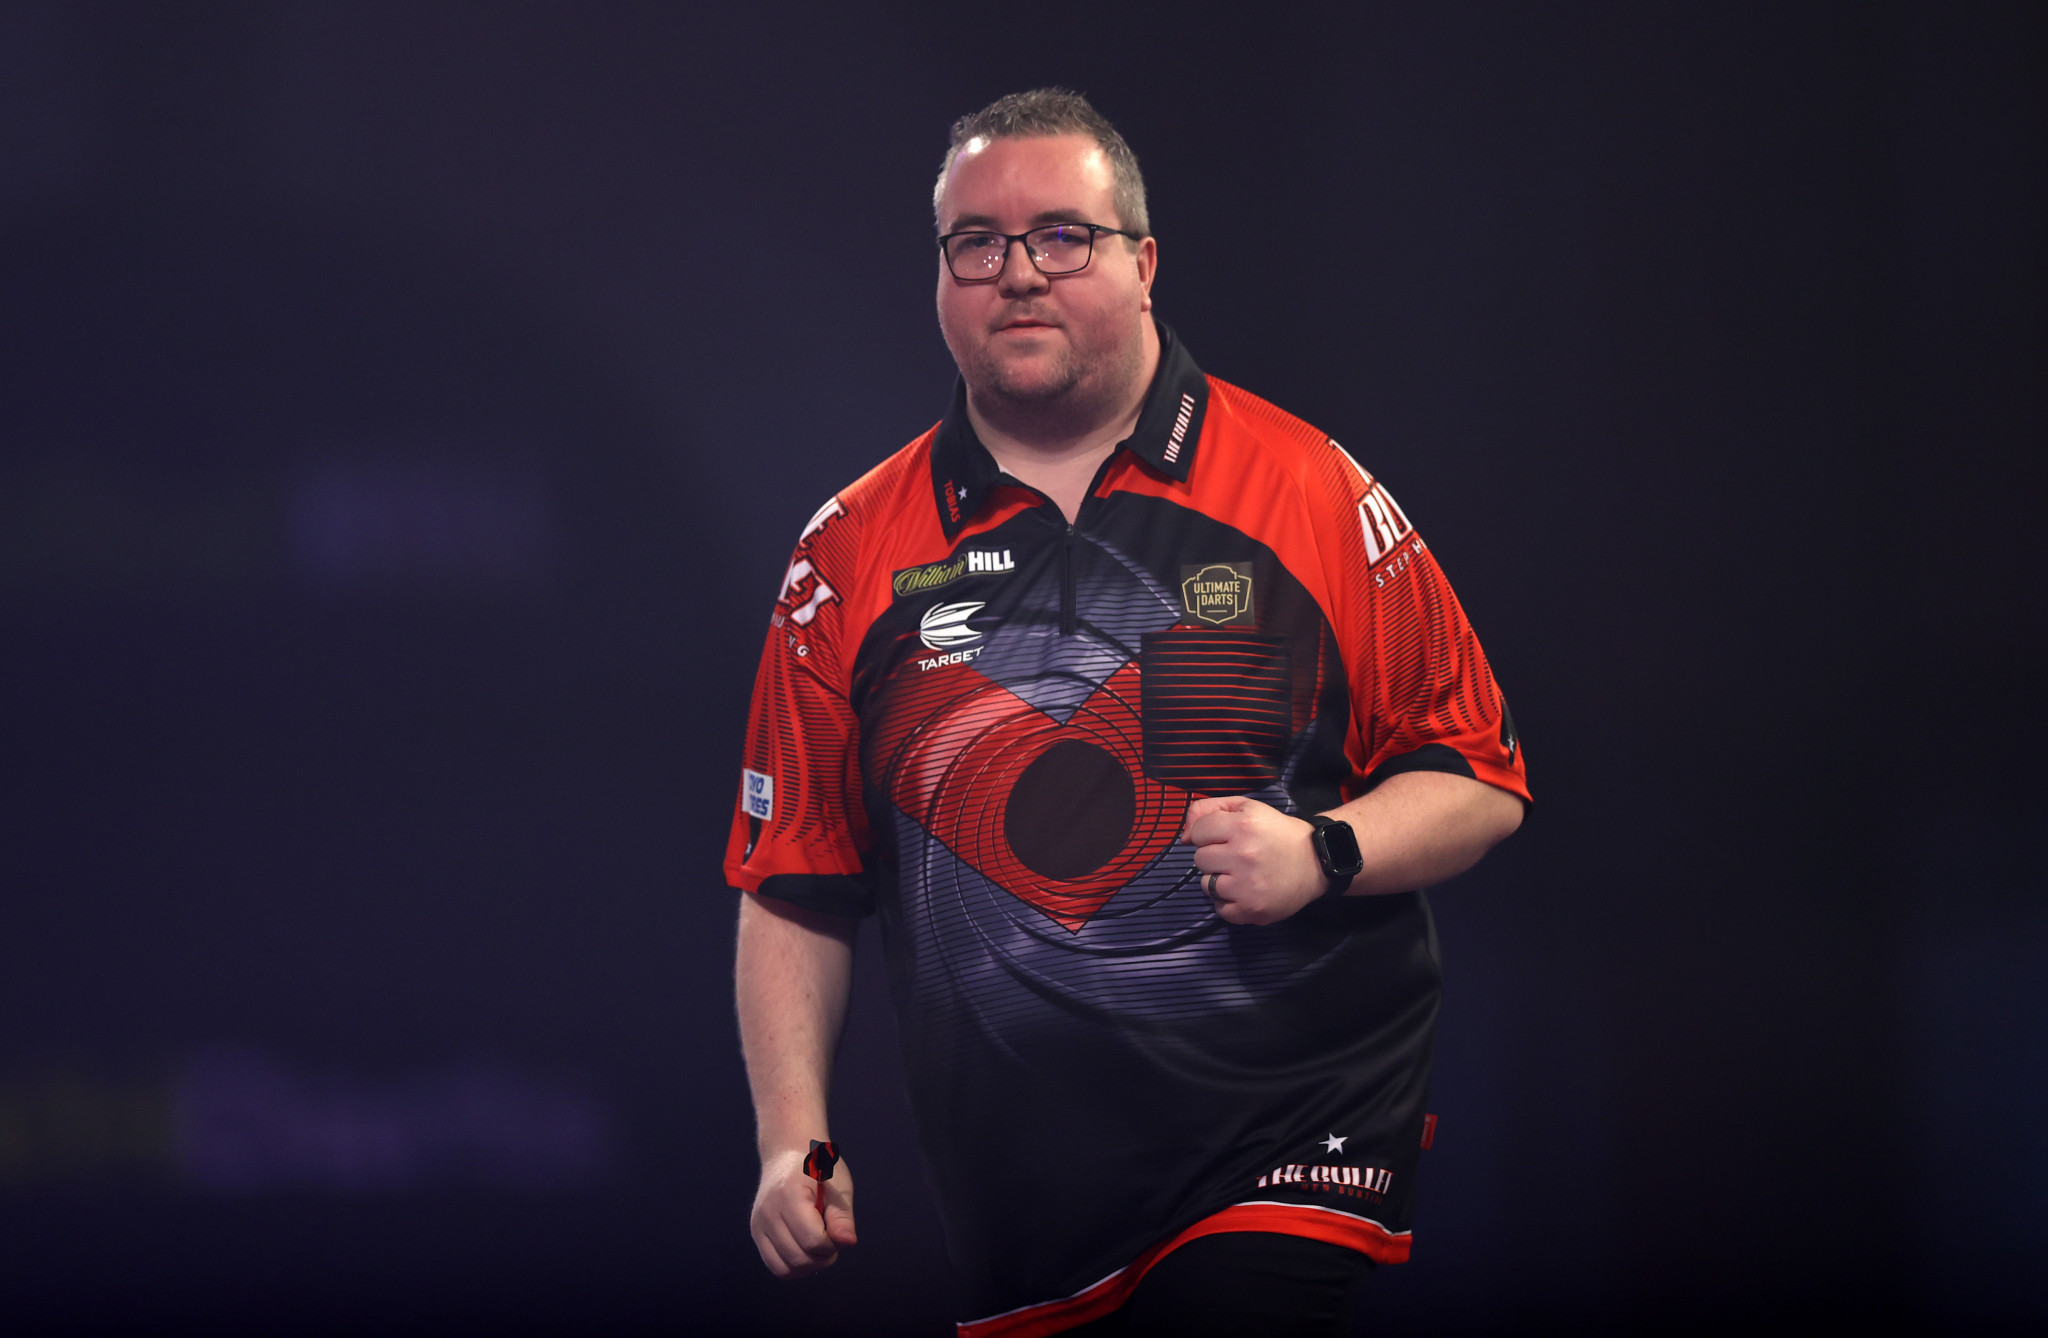 England's Stephen Bunting defeated compatriot Ryan Searle during the fourth round of the PDC World Darts Championship ©Getty Images